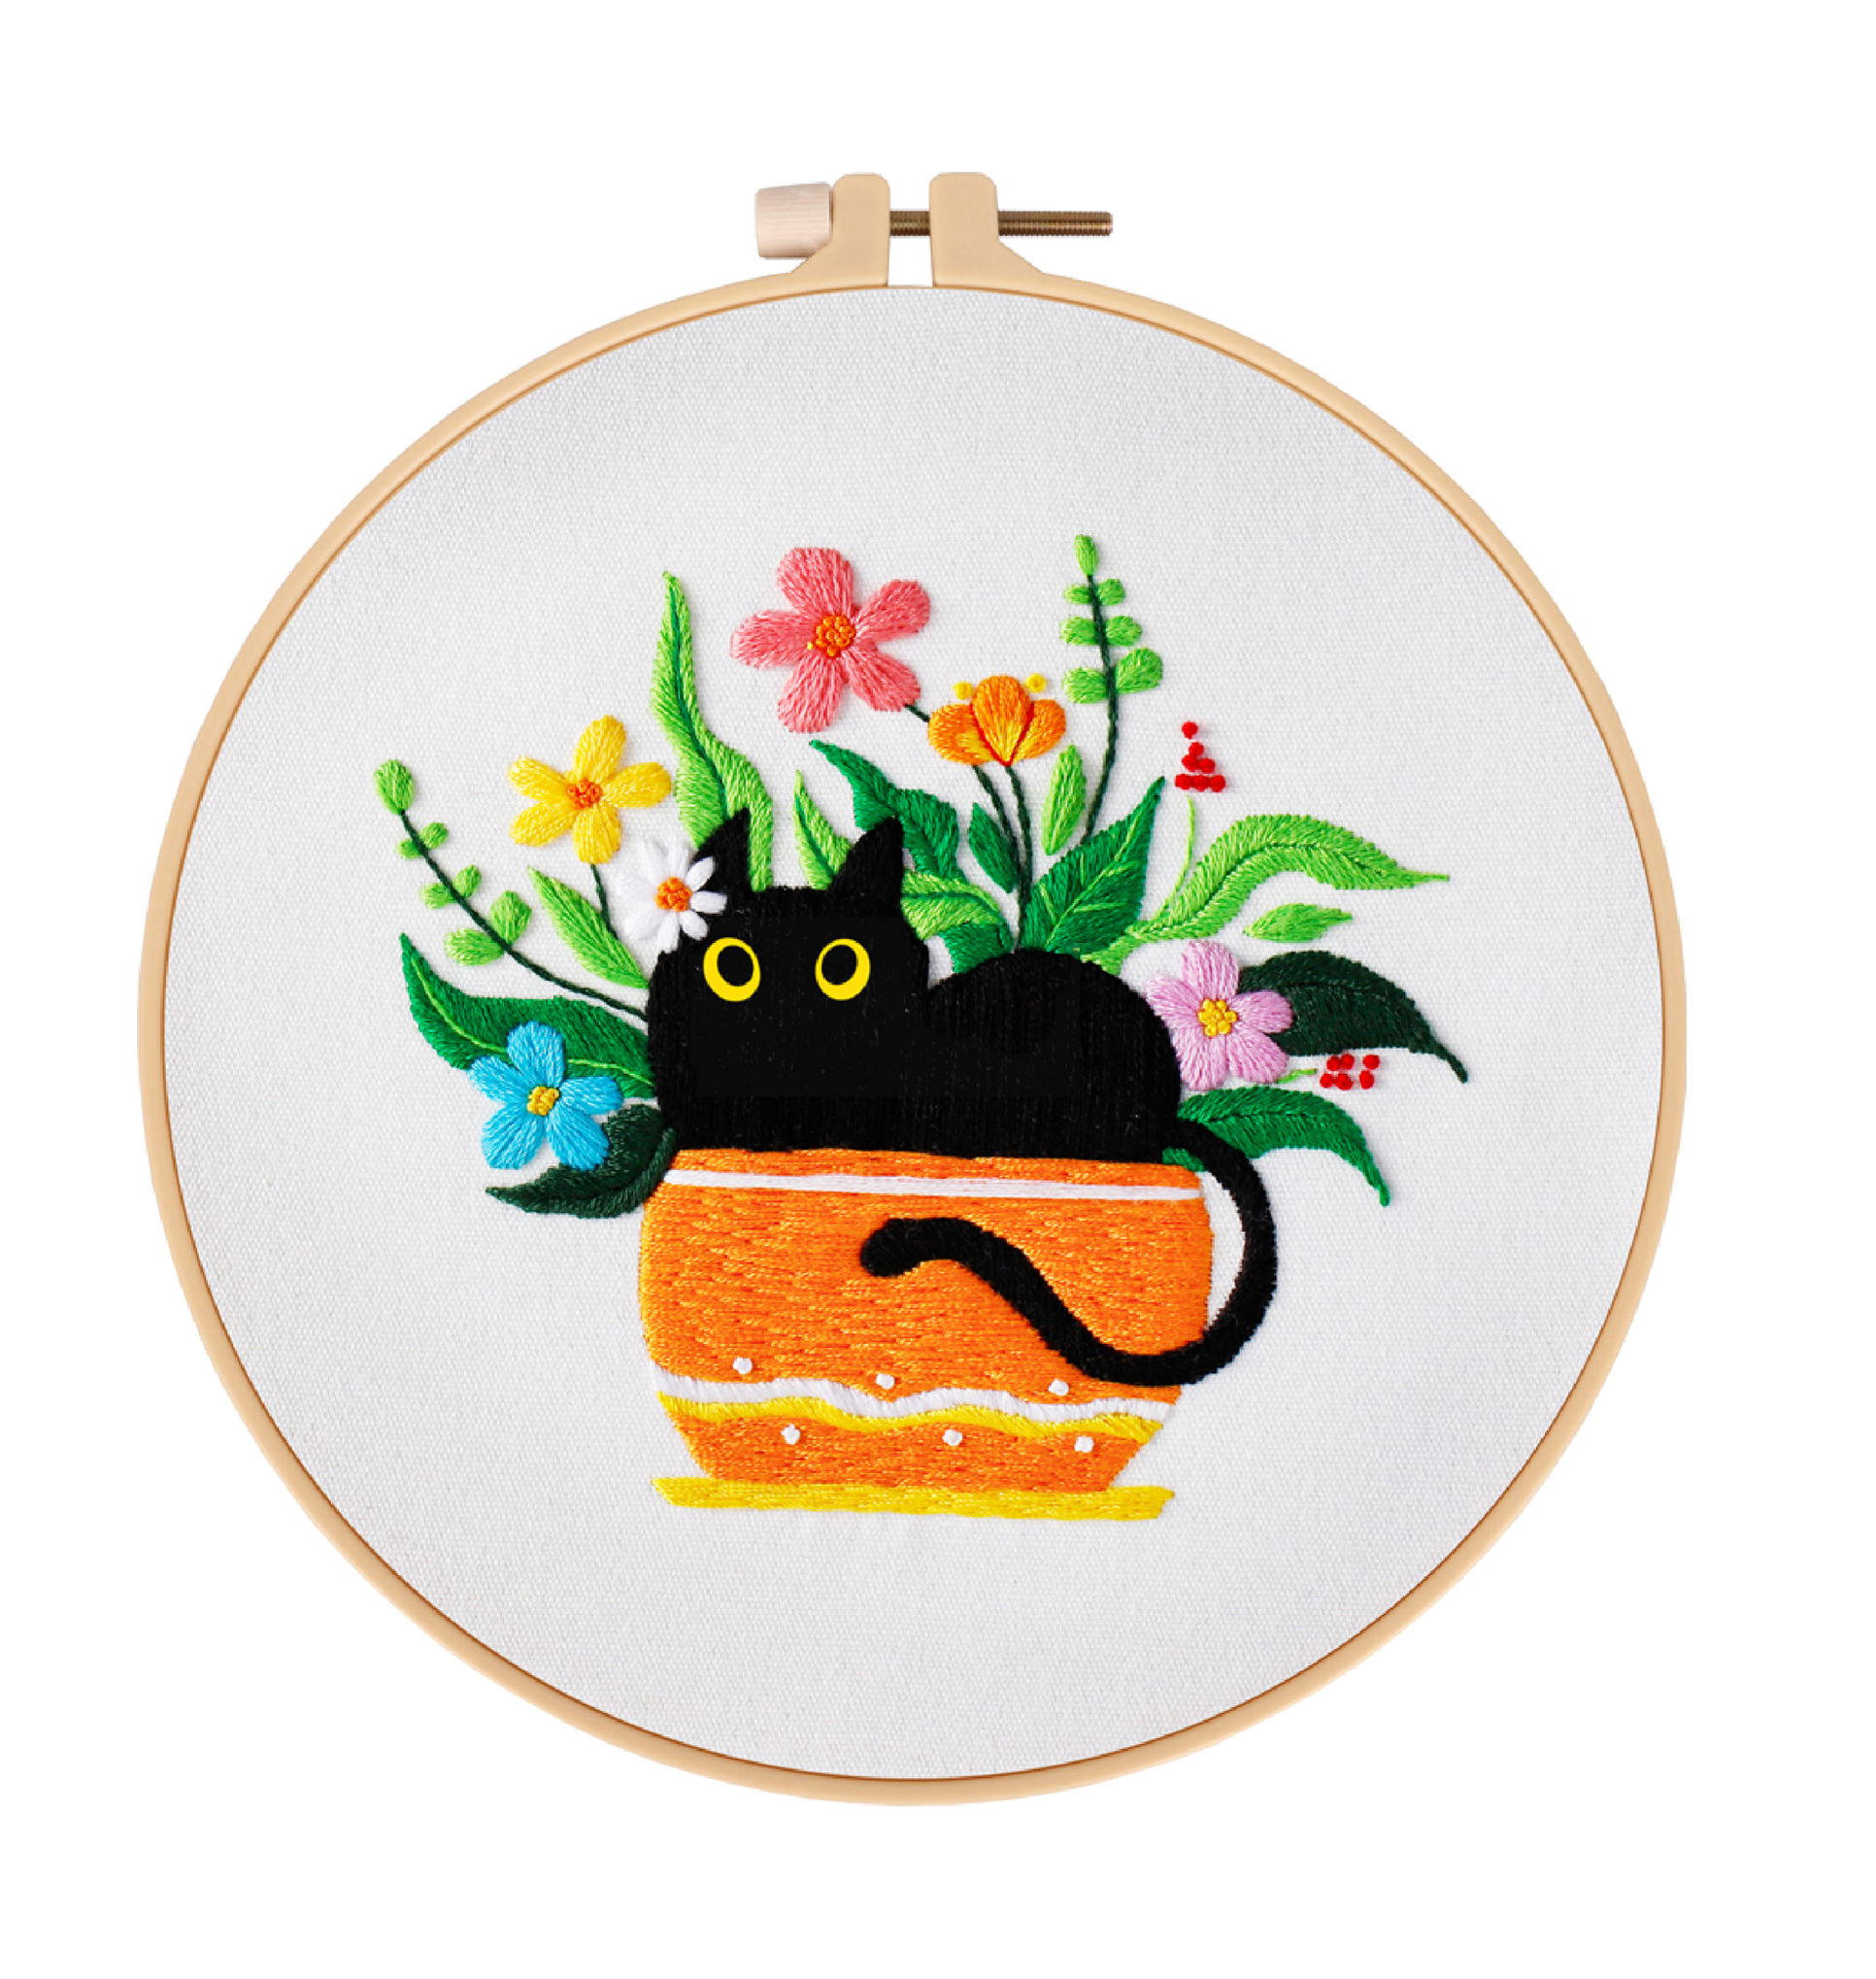 DIY Handmade Embroidery Kit for Adult Beginner- Black Cat Potted Pattern